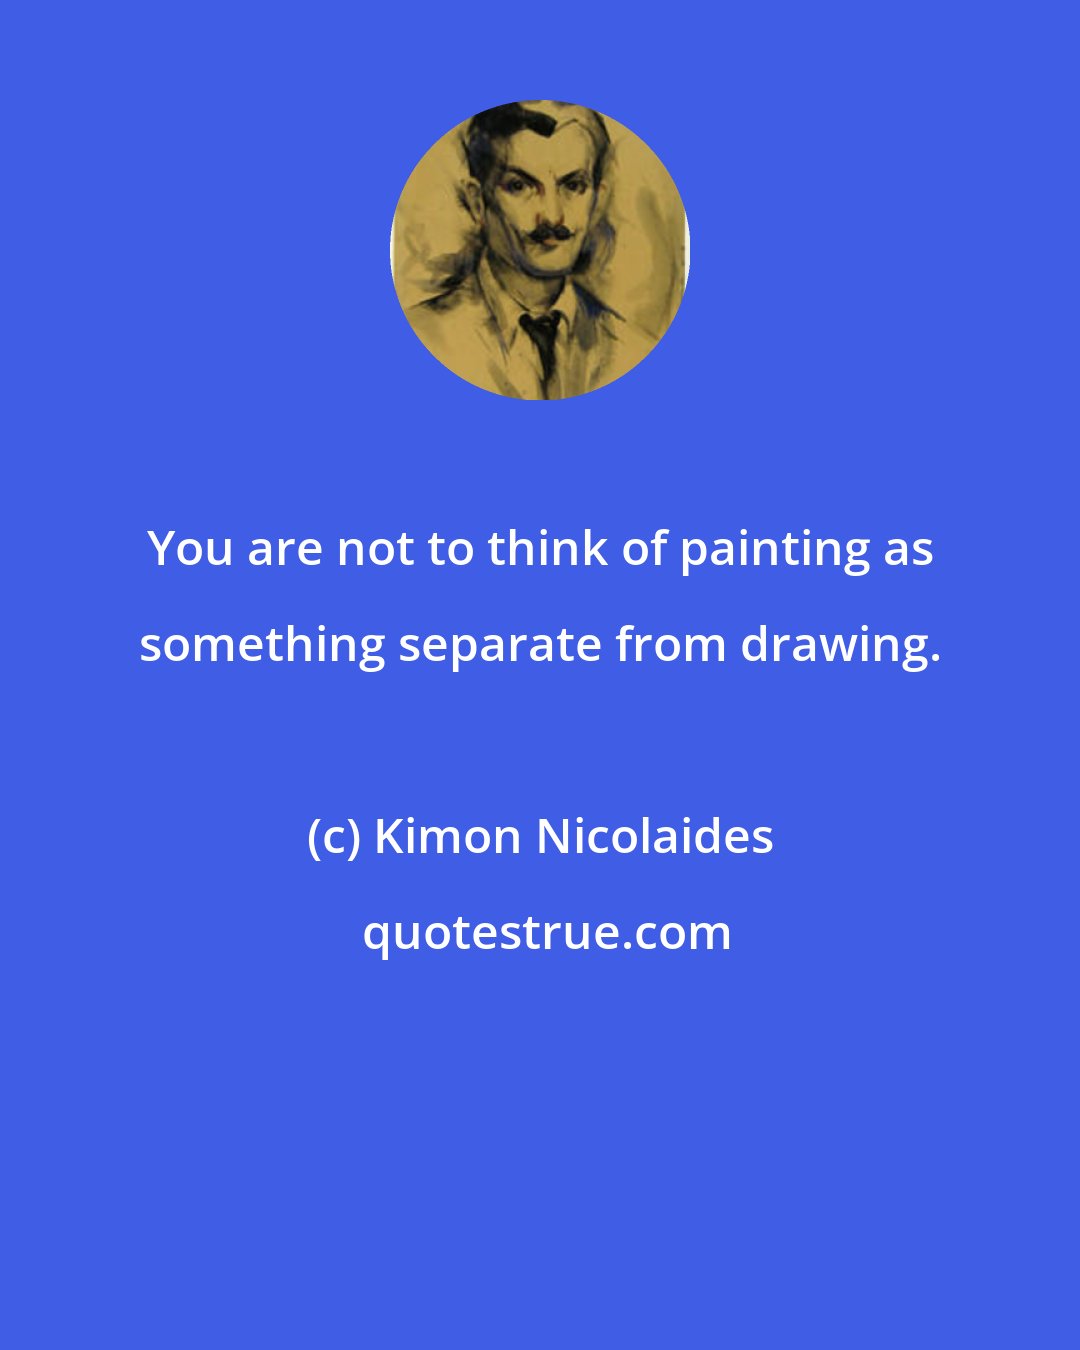 Kimon Nicolaides: You are not to think of painting as something separate from drawing.